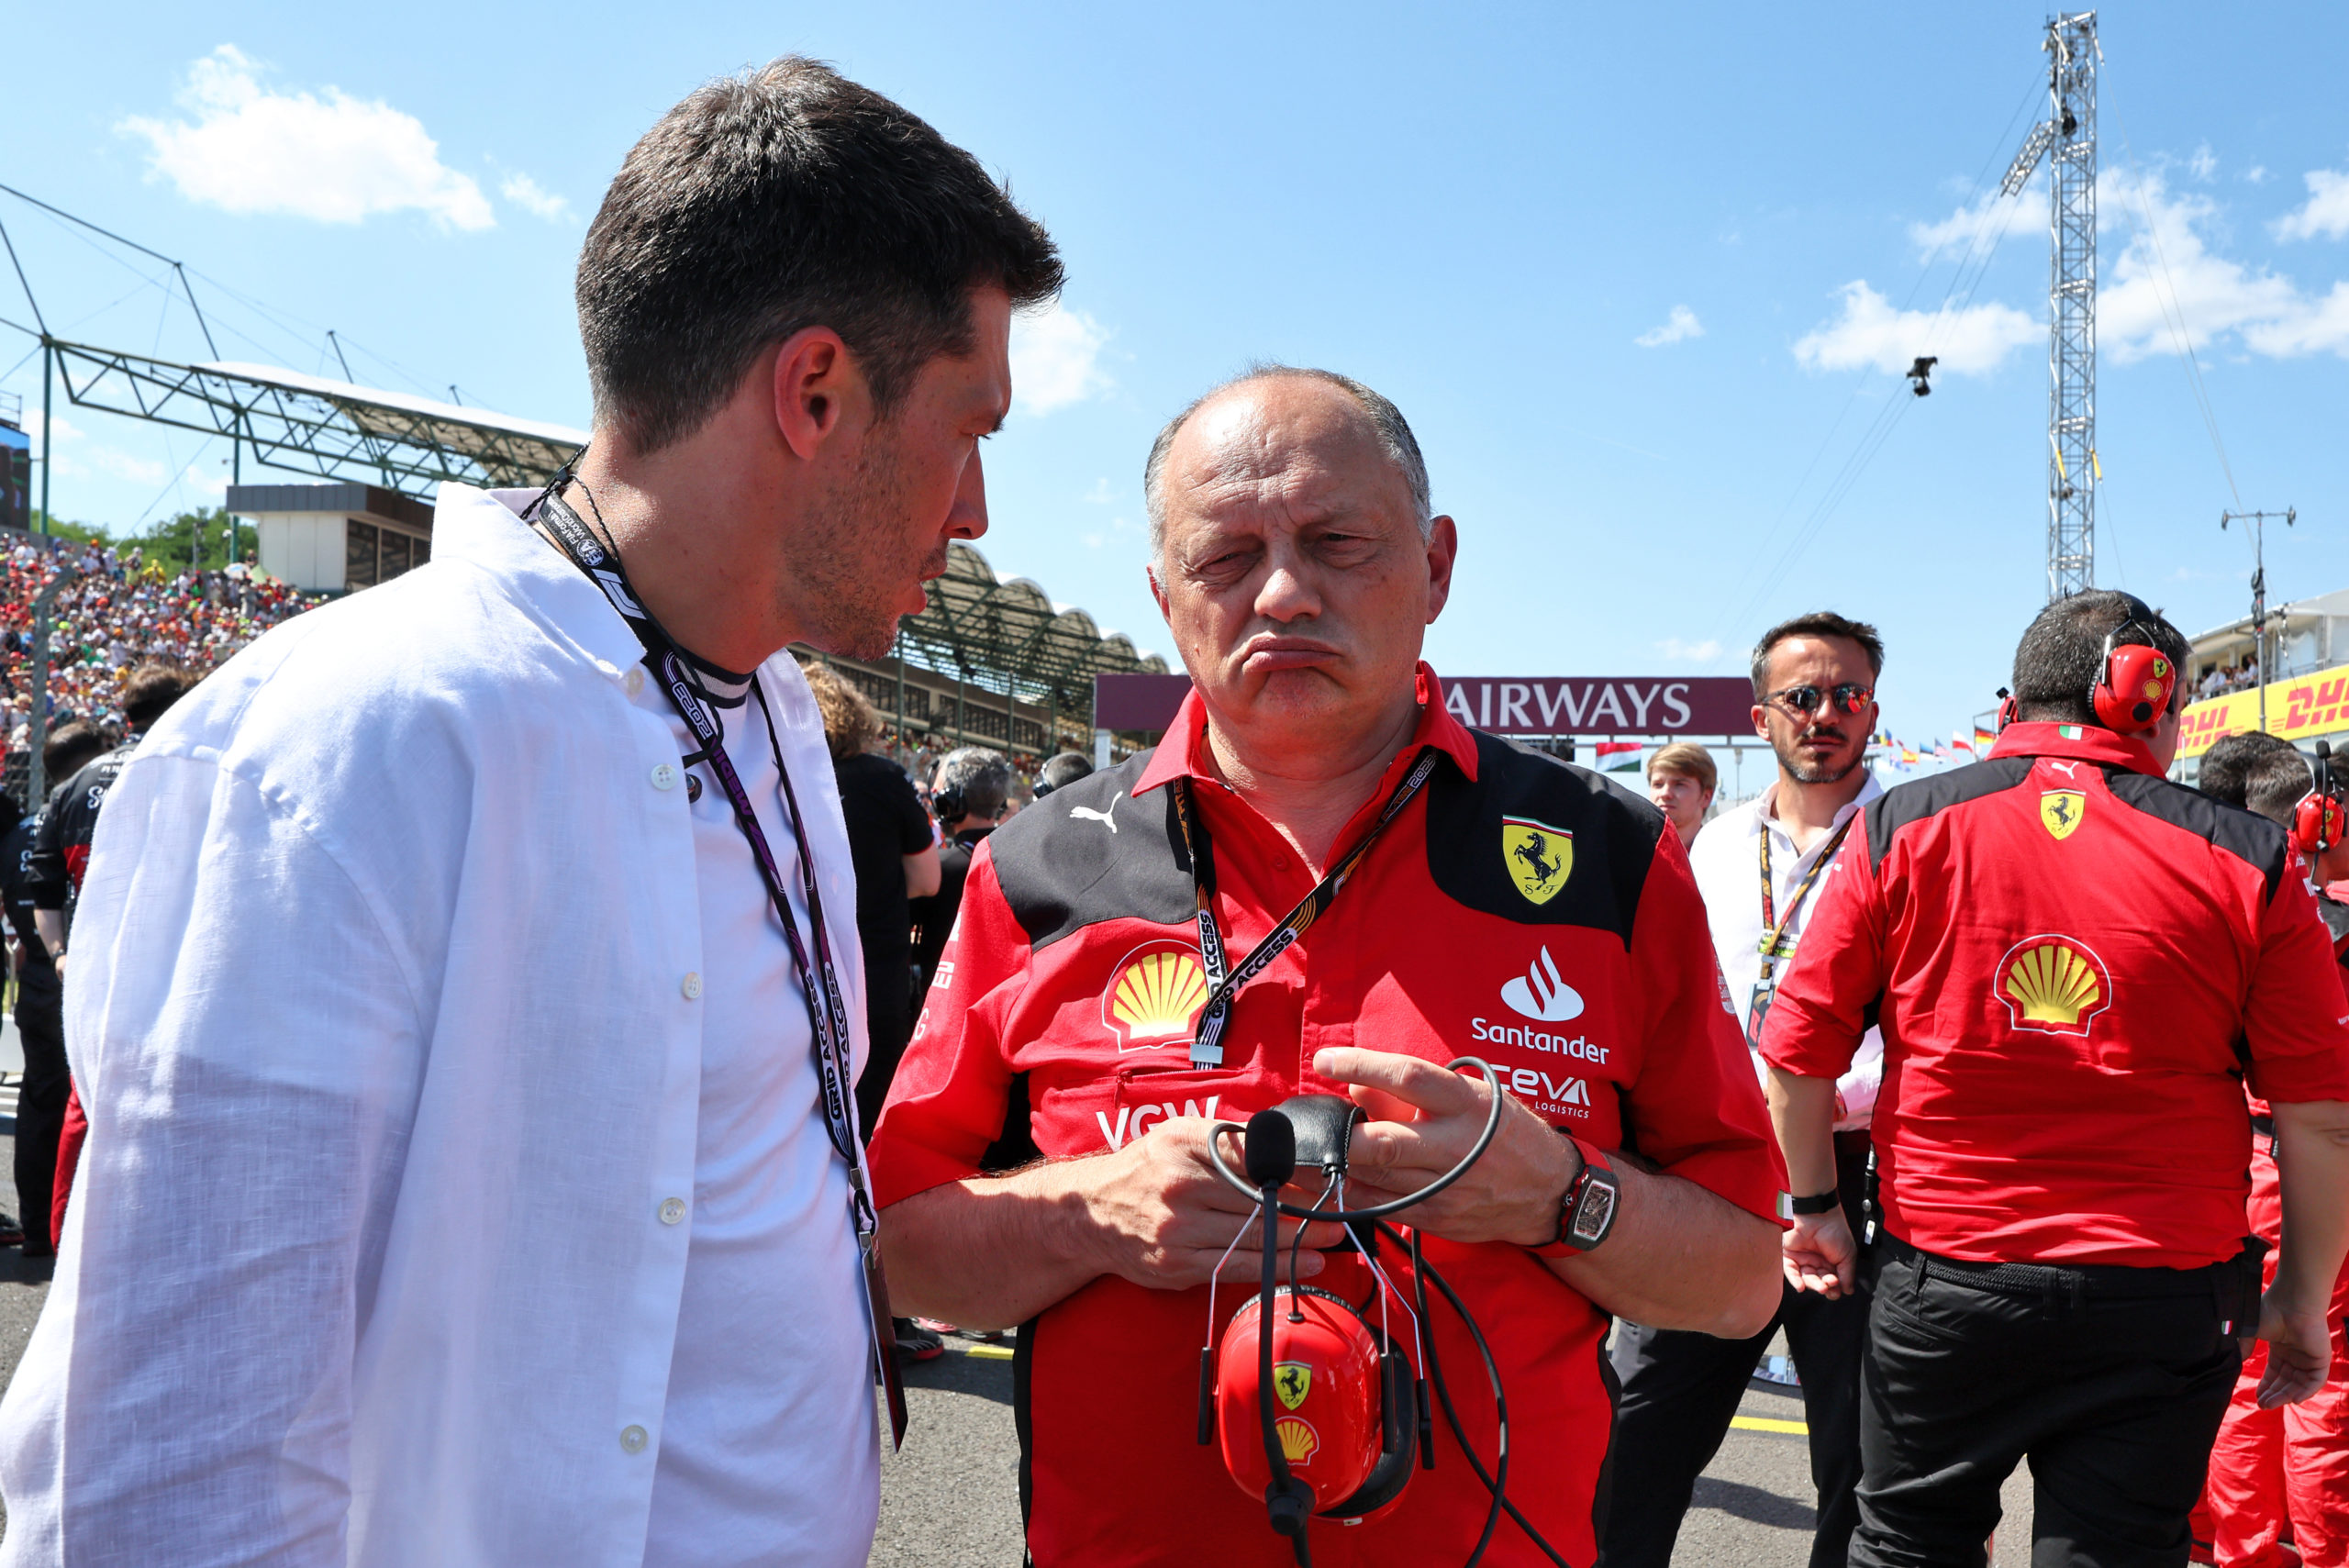 vasseur 1-to-1: ferrari mistakes, drivers and ignoring the noise